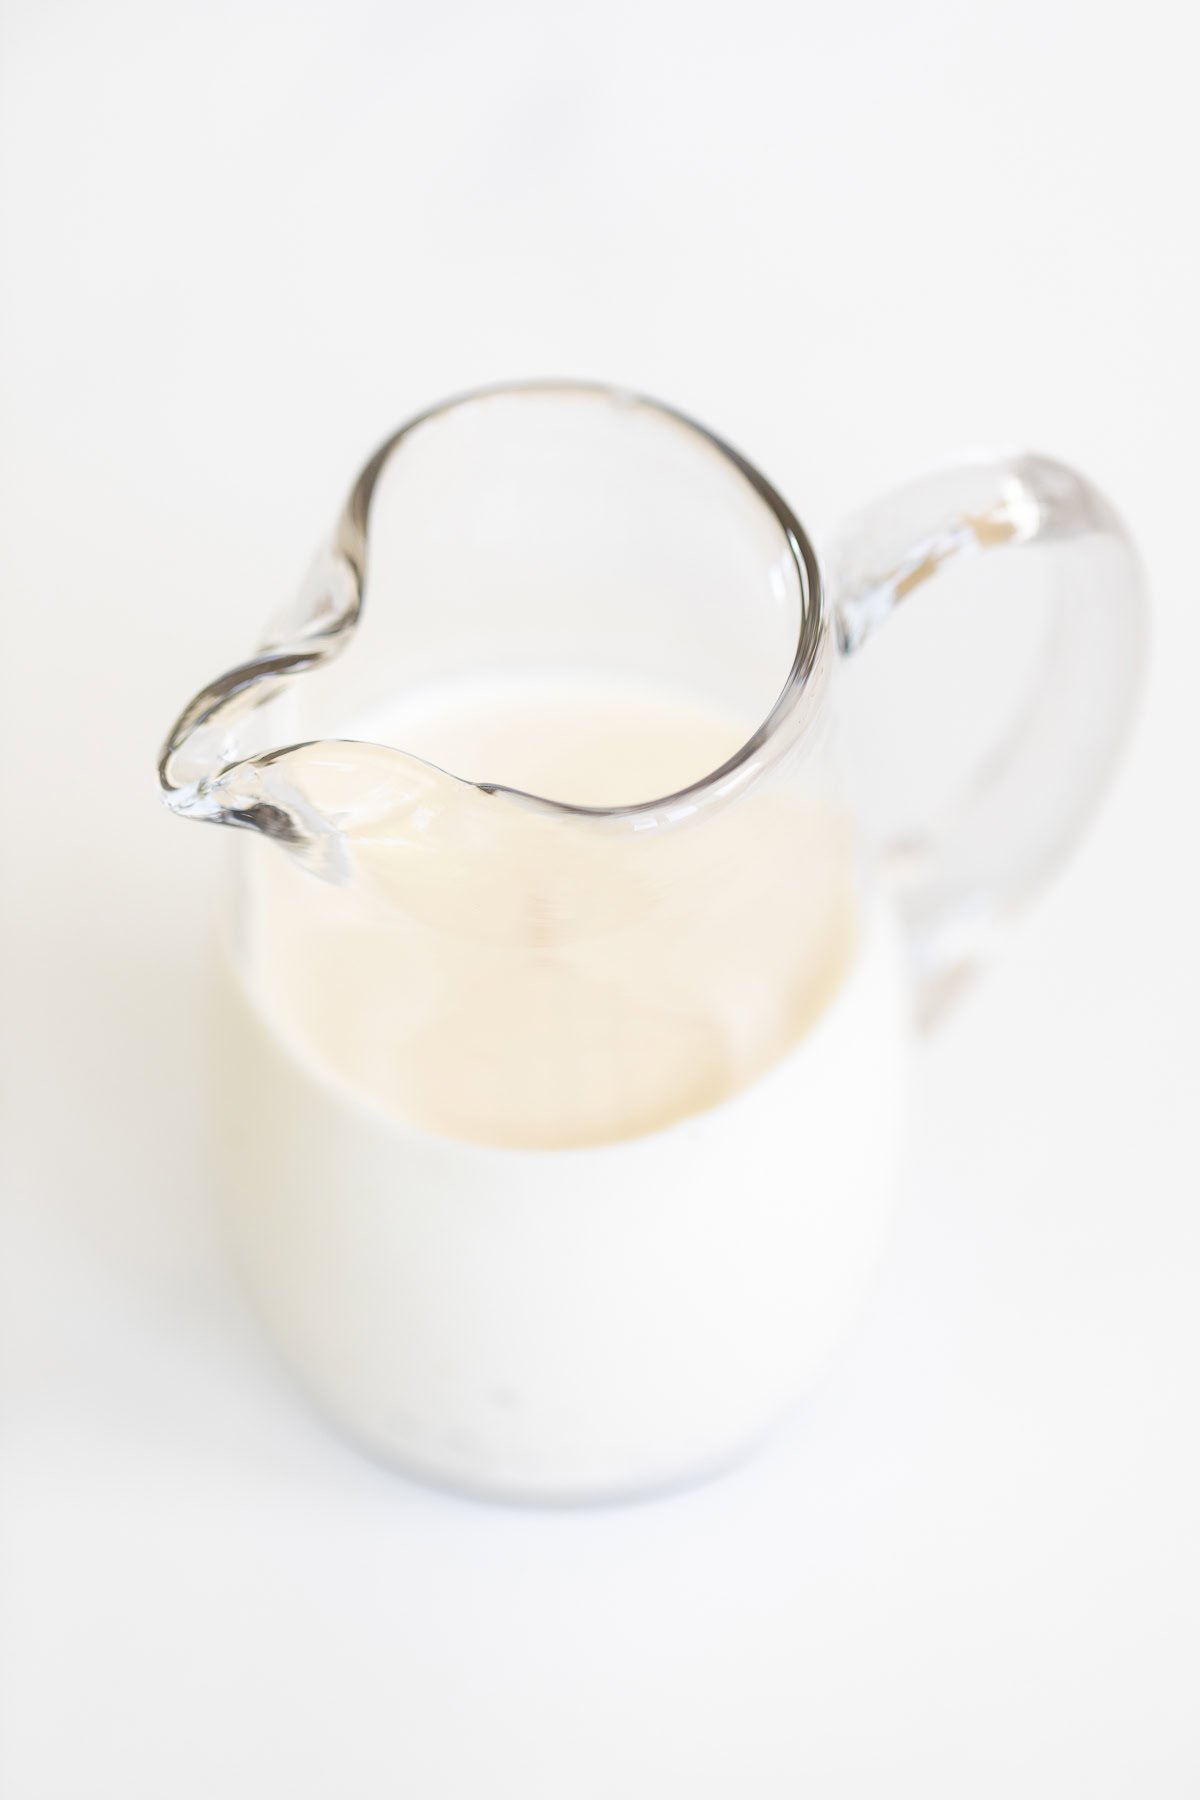 Clear glass pitcher filled with creamy pasta salad dressing on a white background.